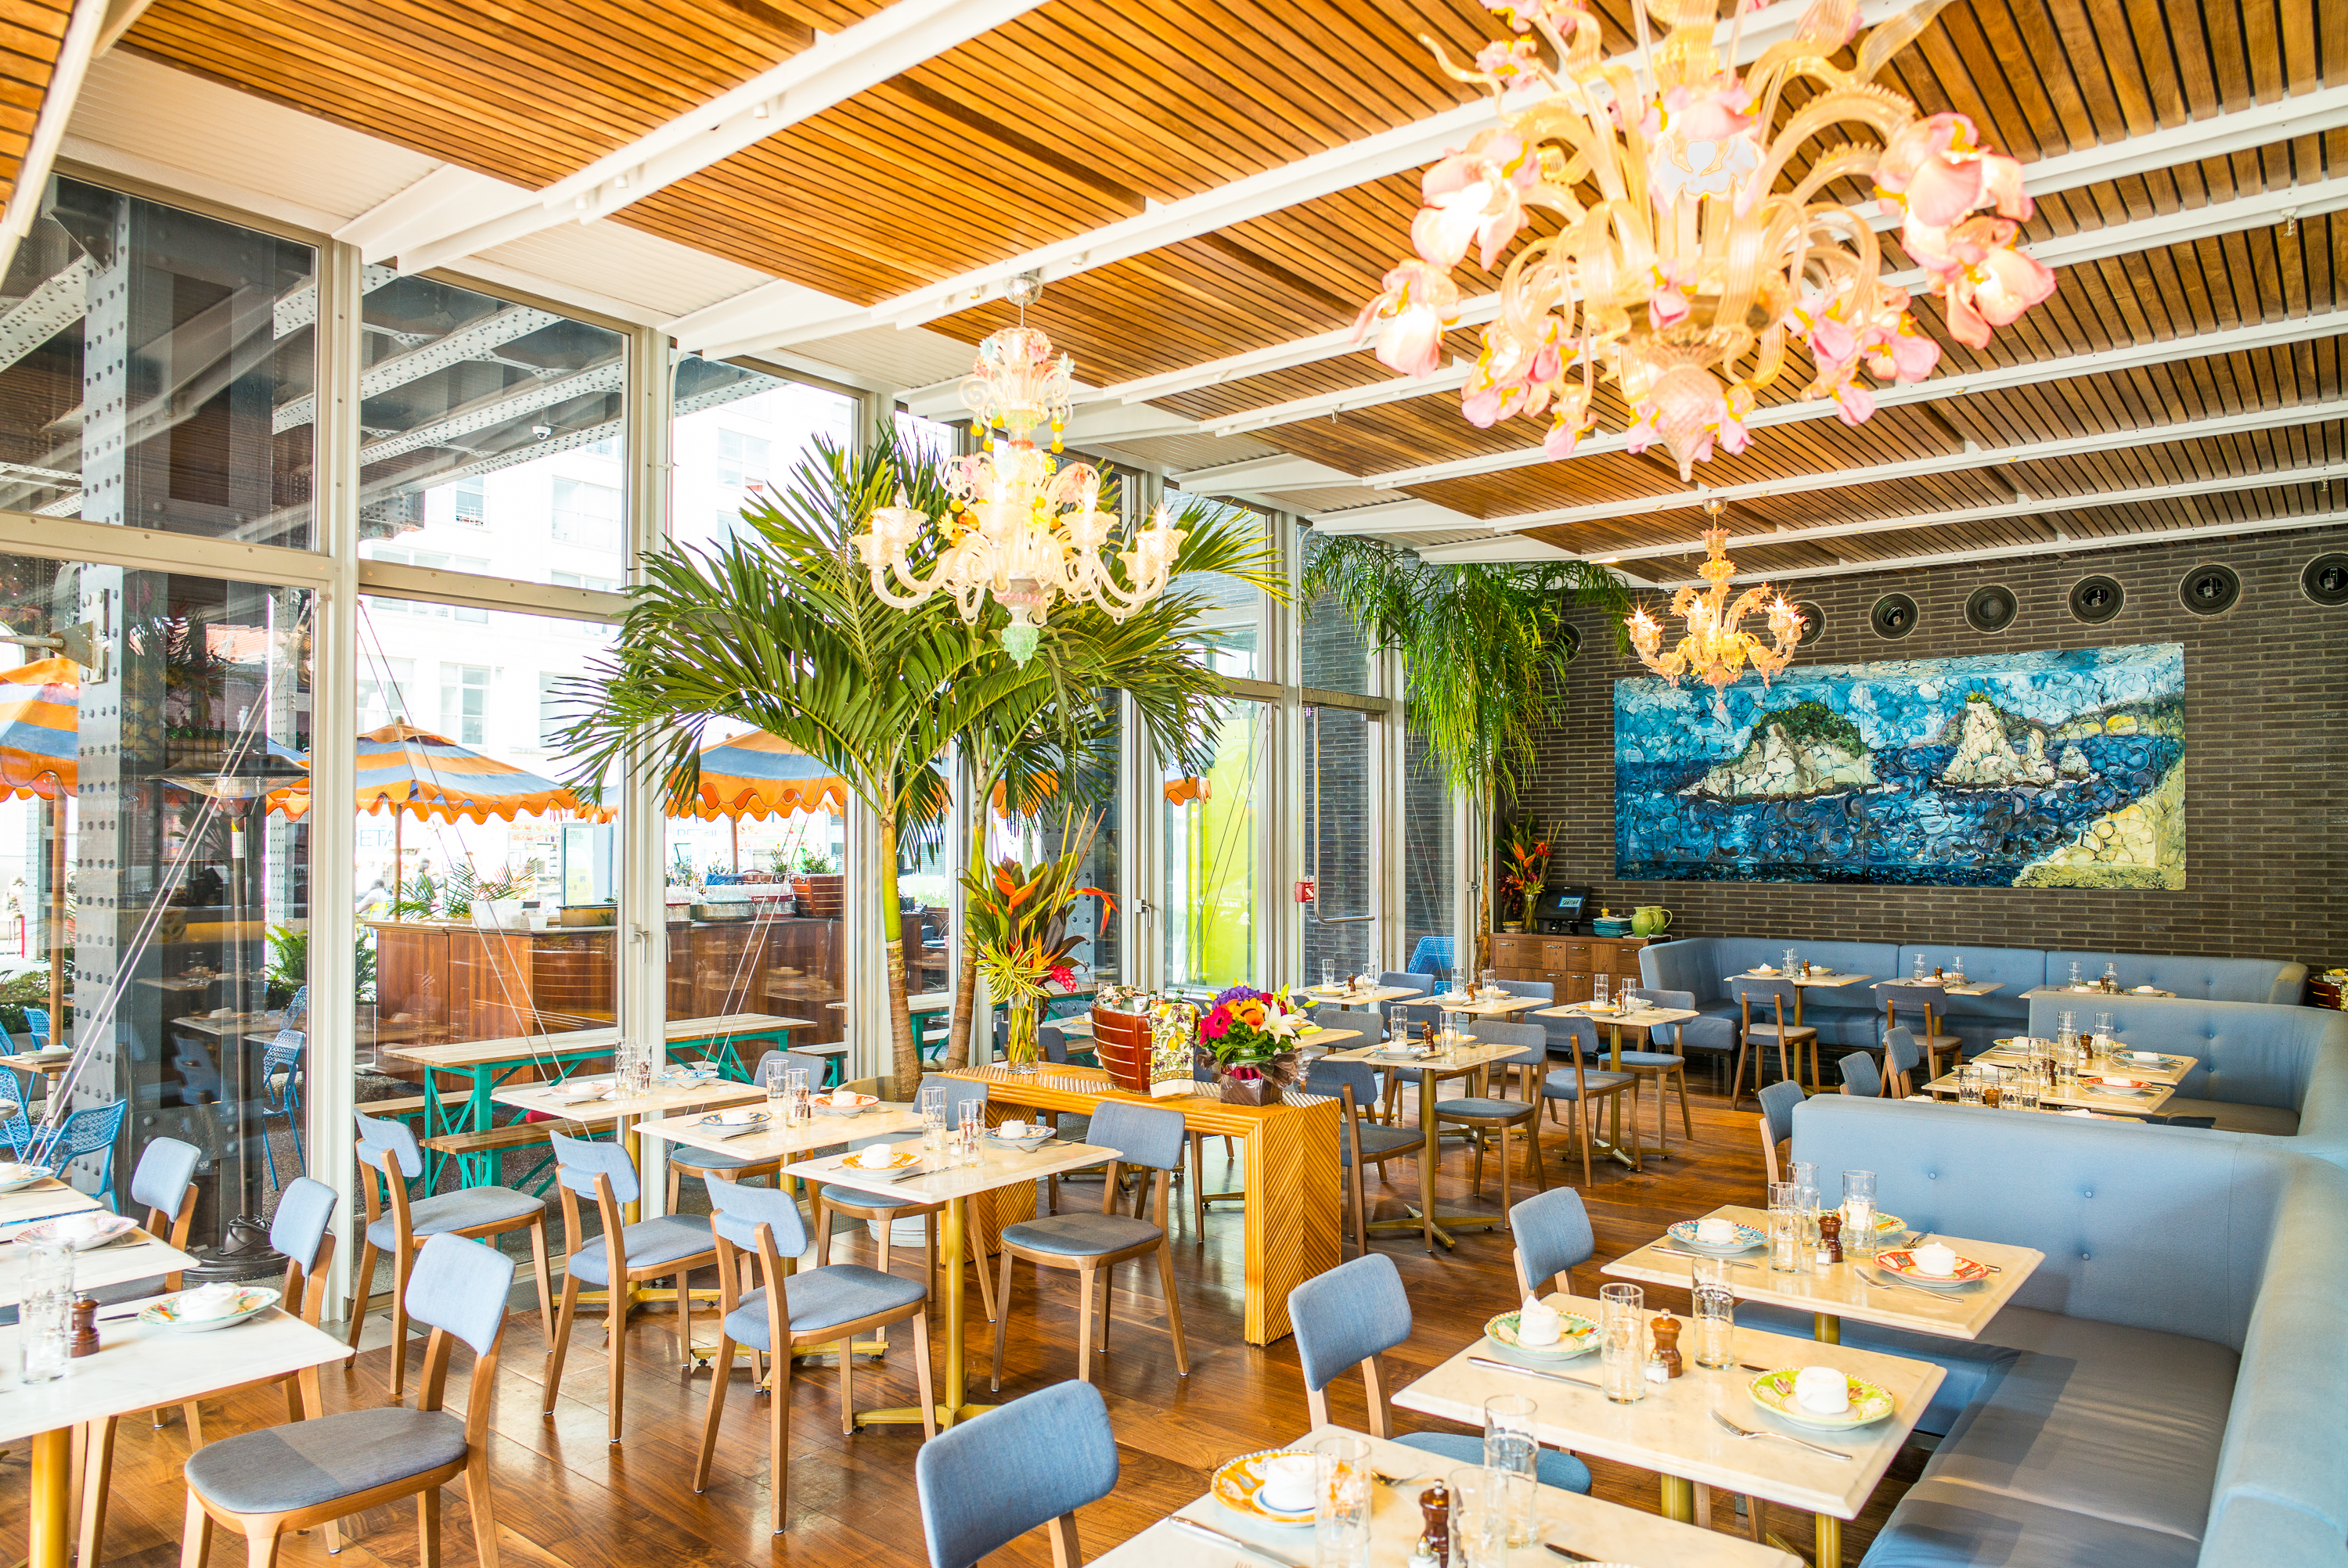 Santina’s dining room has a chandelier up top and floor-to-ceiling windows in the back.